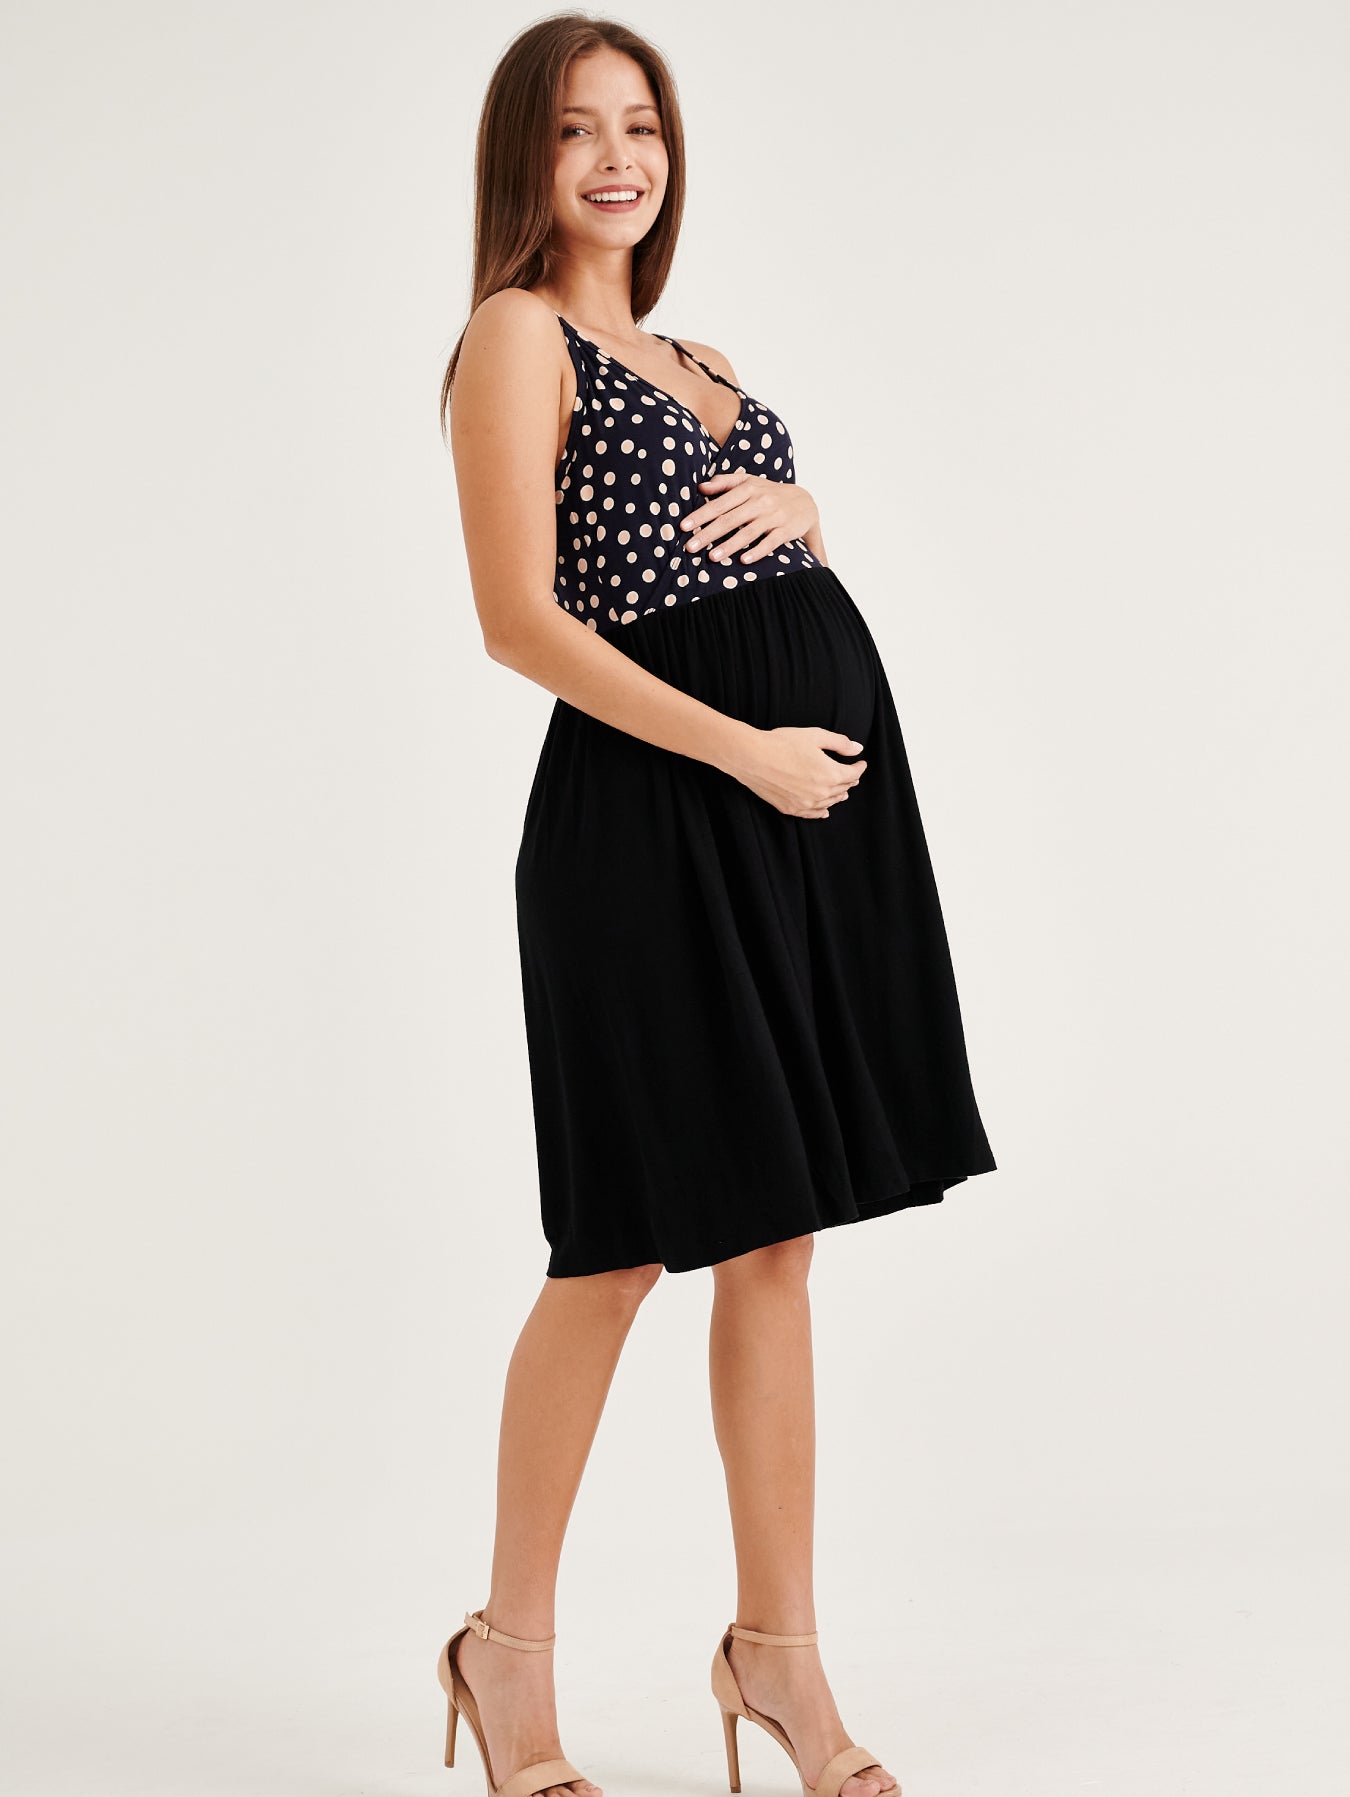 Comfortable maternity clothing for all stages of pregnancy